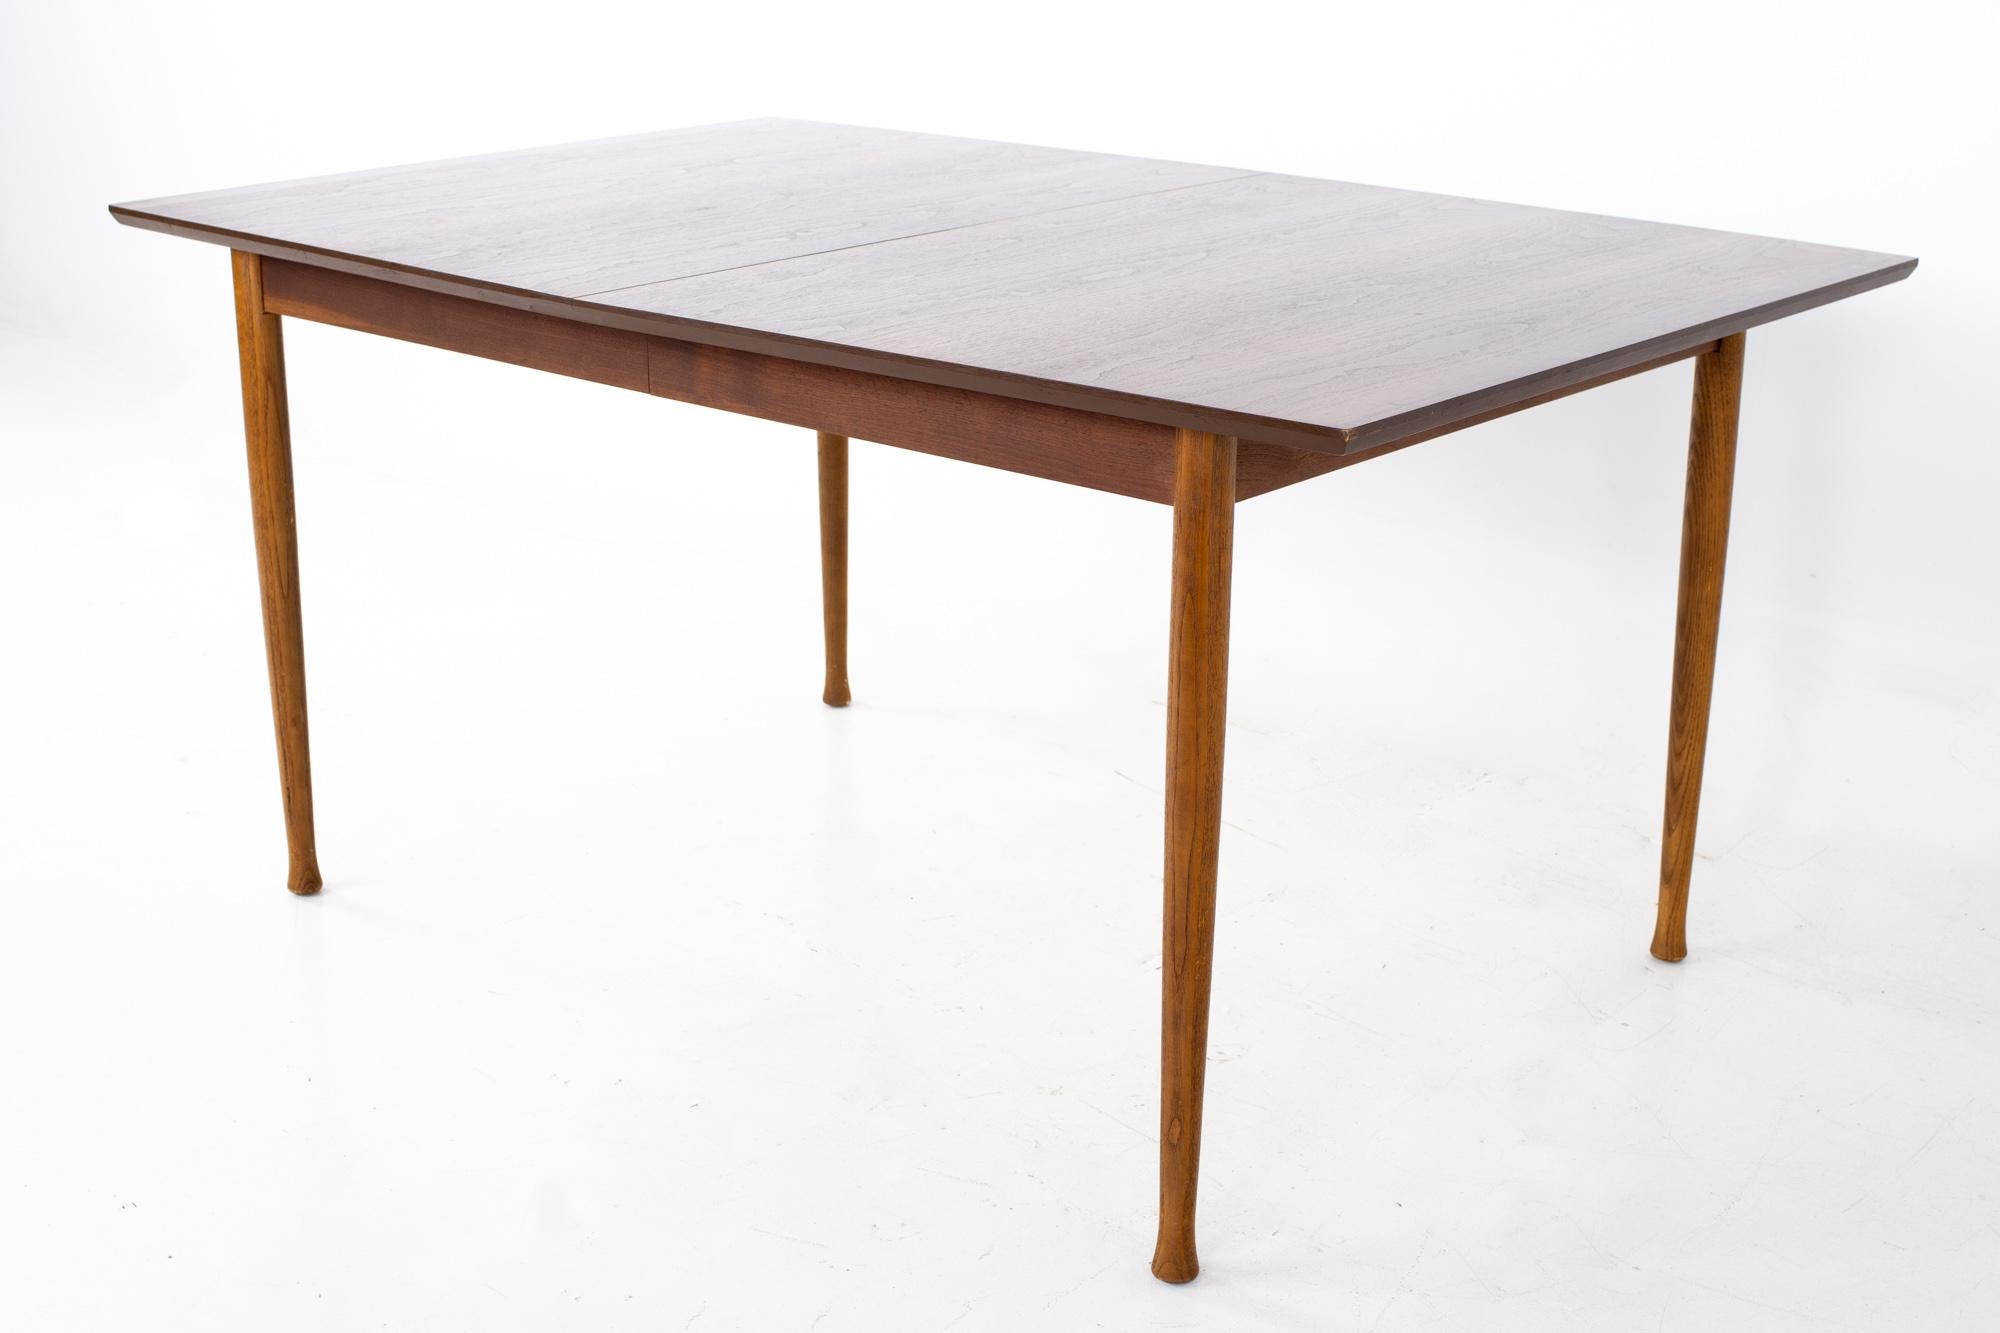 Kent Coffey Perspecta mid century walnut surfboard dining table
Table measures: 60 wide x 40 deep x 29 inches high; the leaf is 12 inches wide, making a maximum table width of 72 inches when used, and has a chair clearance of 26 inches

All